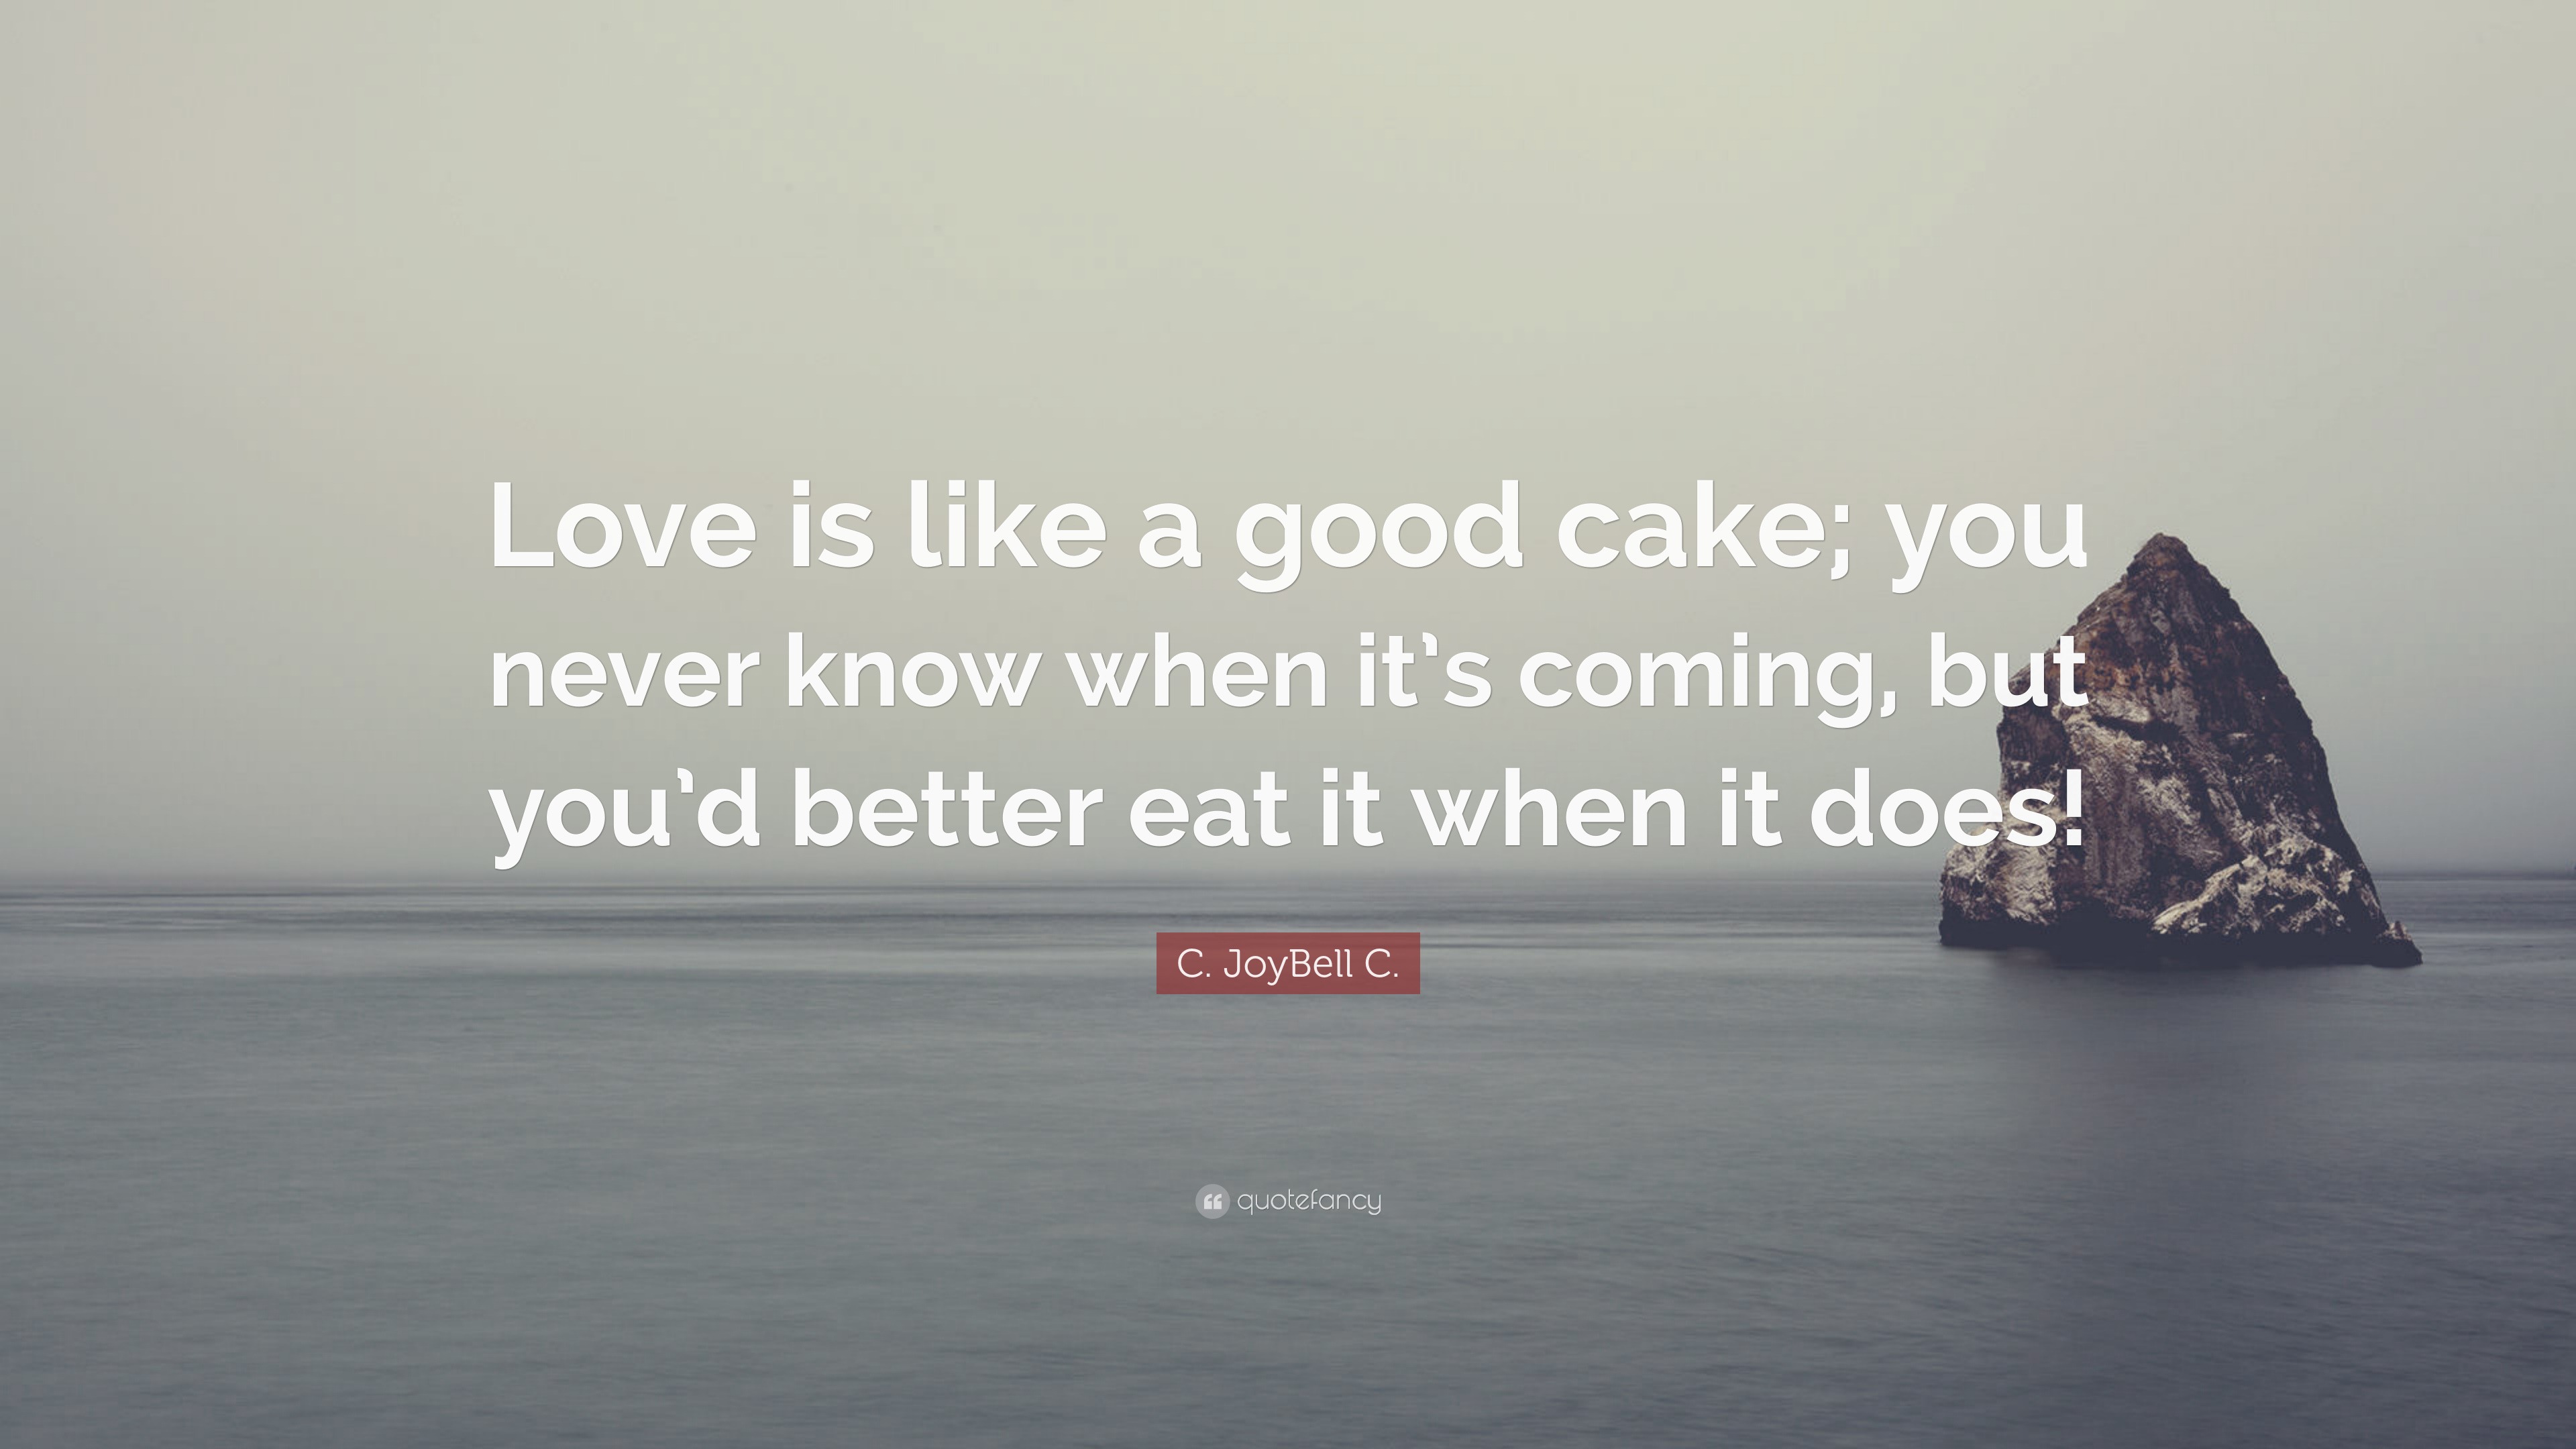 C JoyBell C Quote “Love is like a good cake you